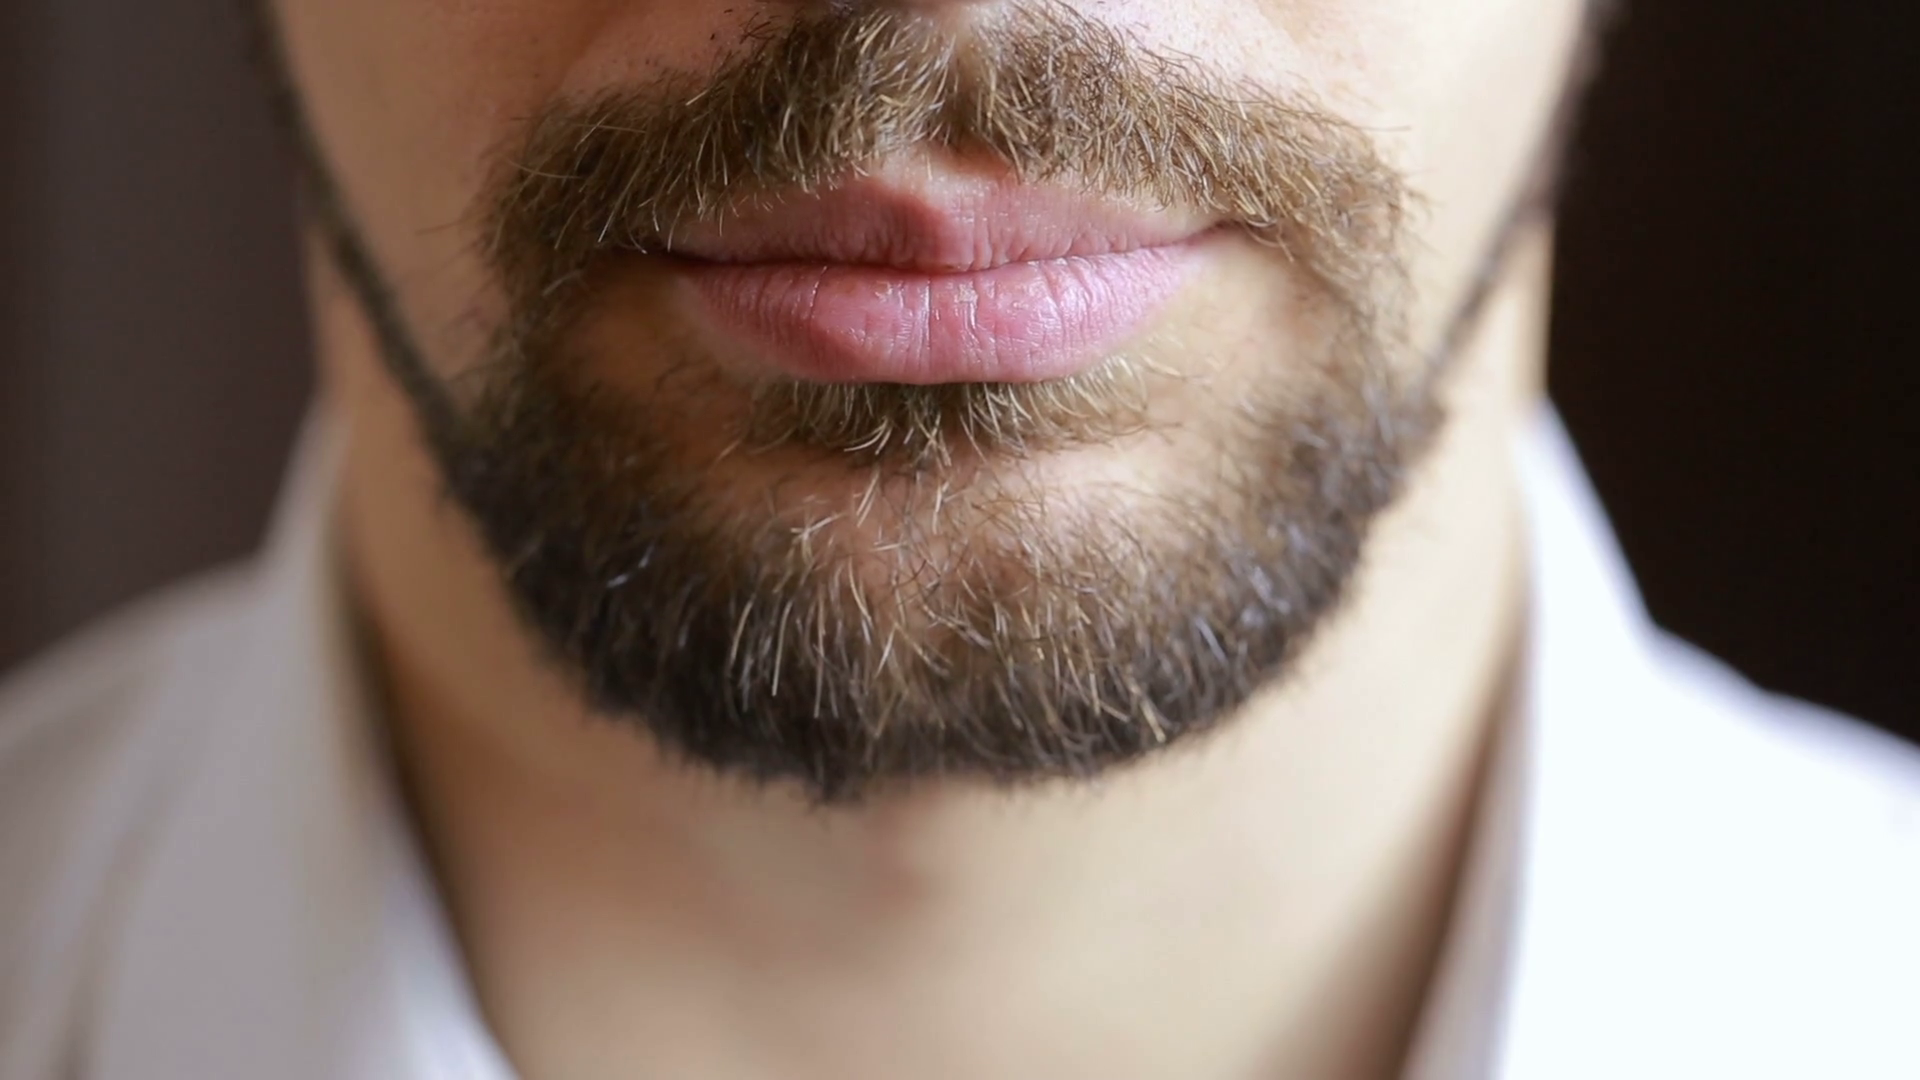 The man's smile. A man with a beard smiling. Close-up. sexy lips ...